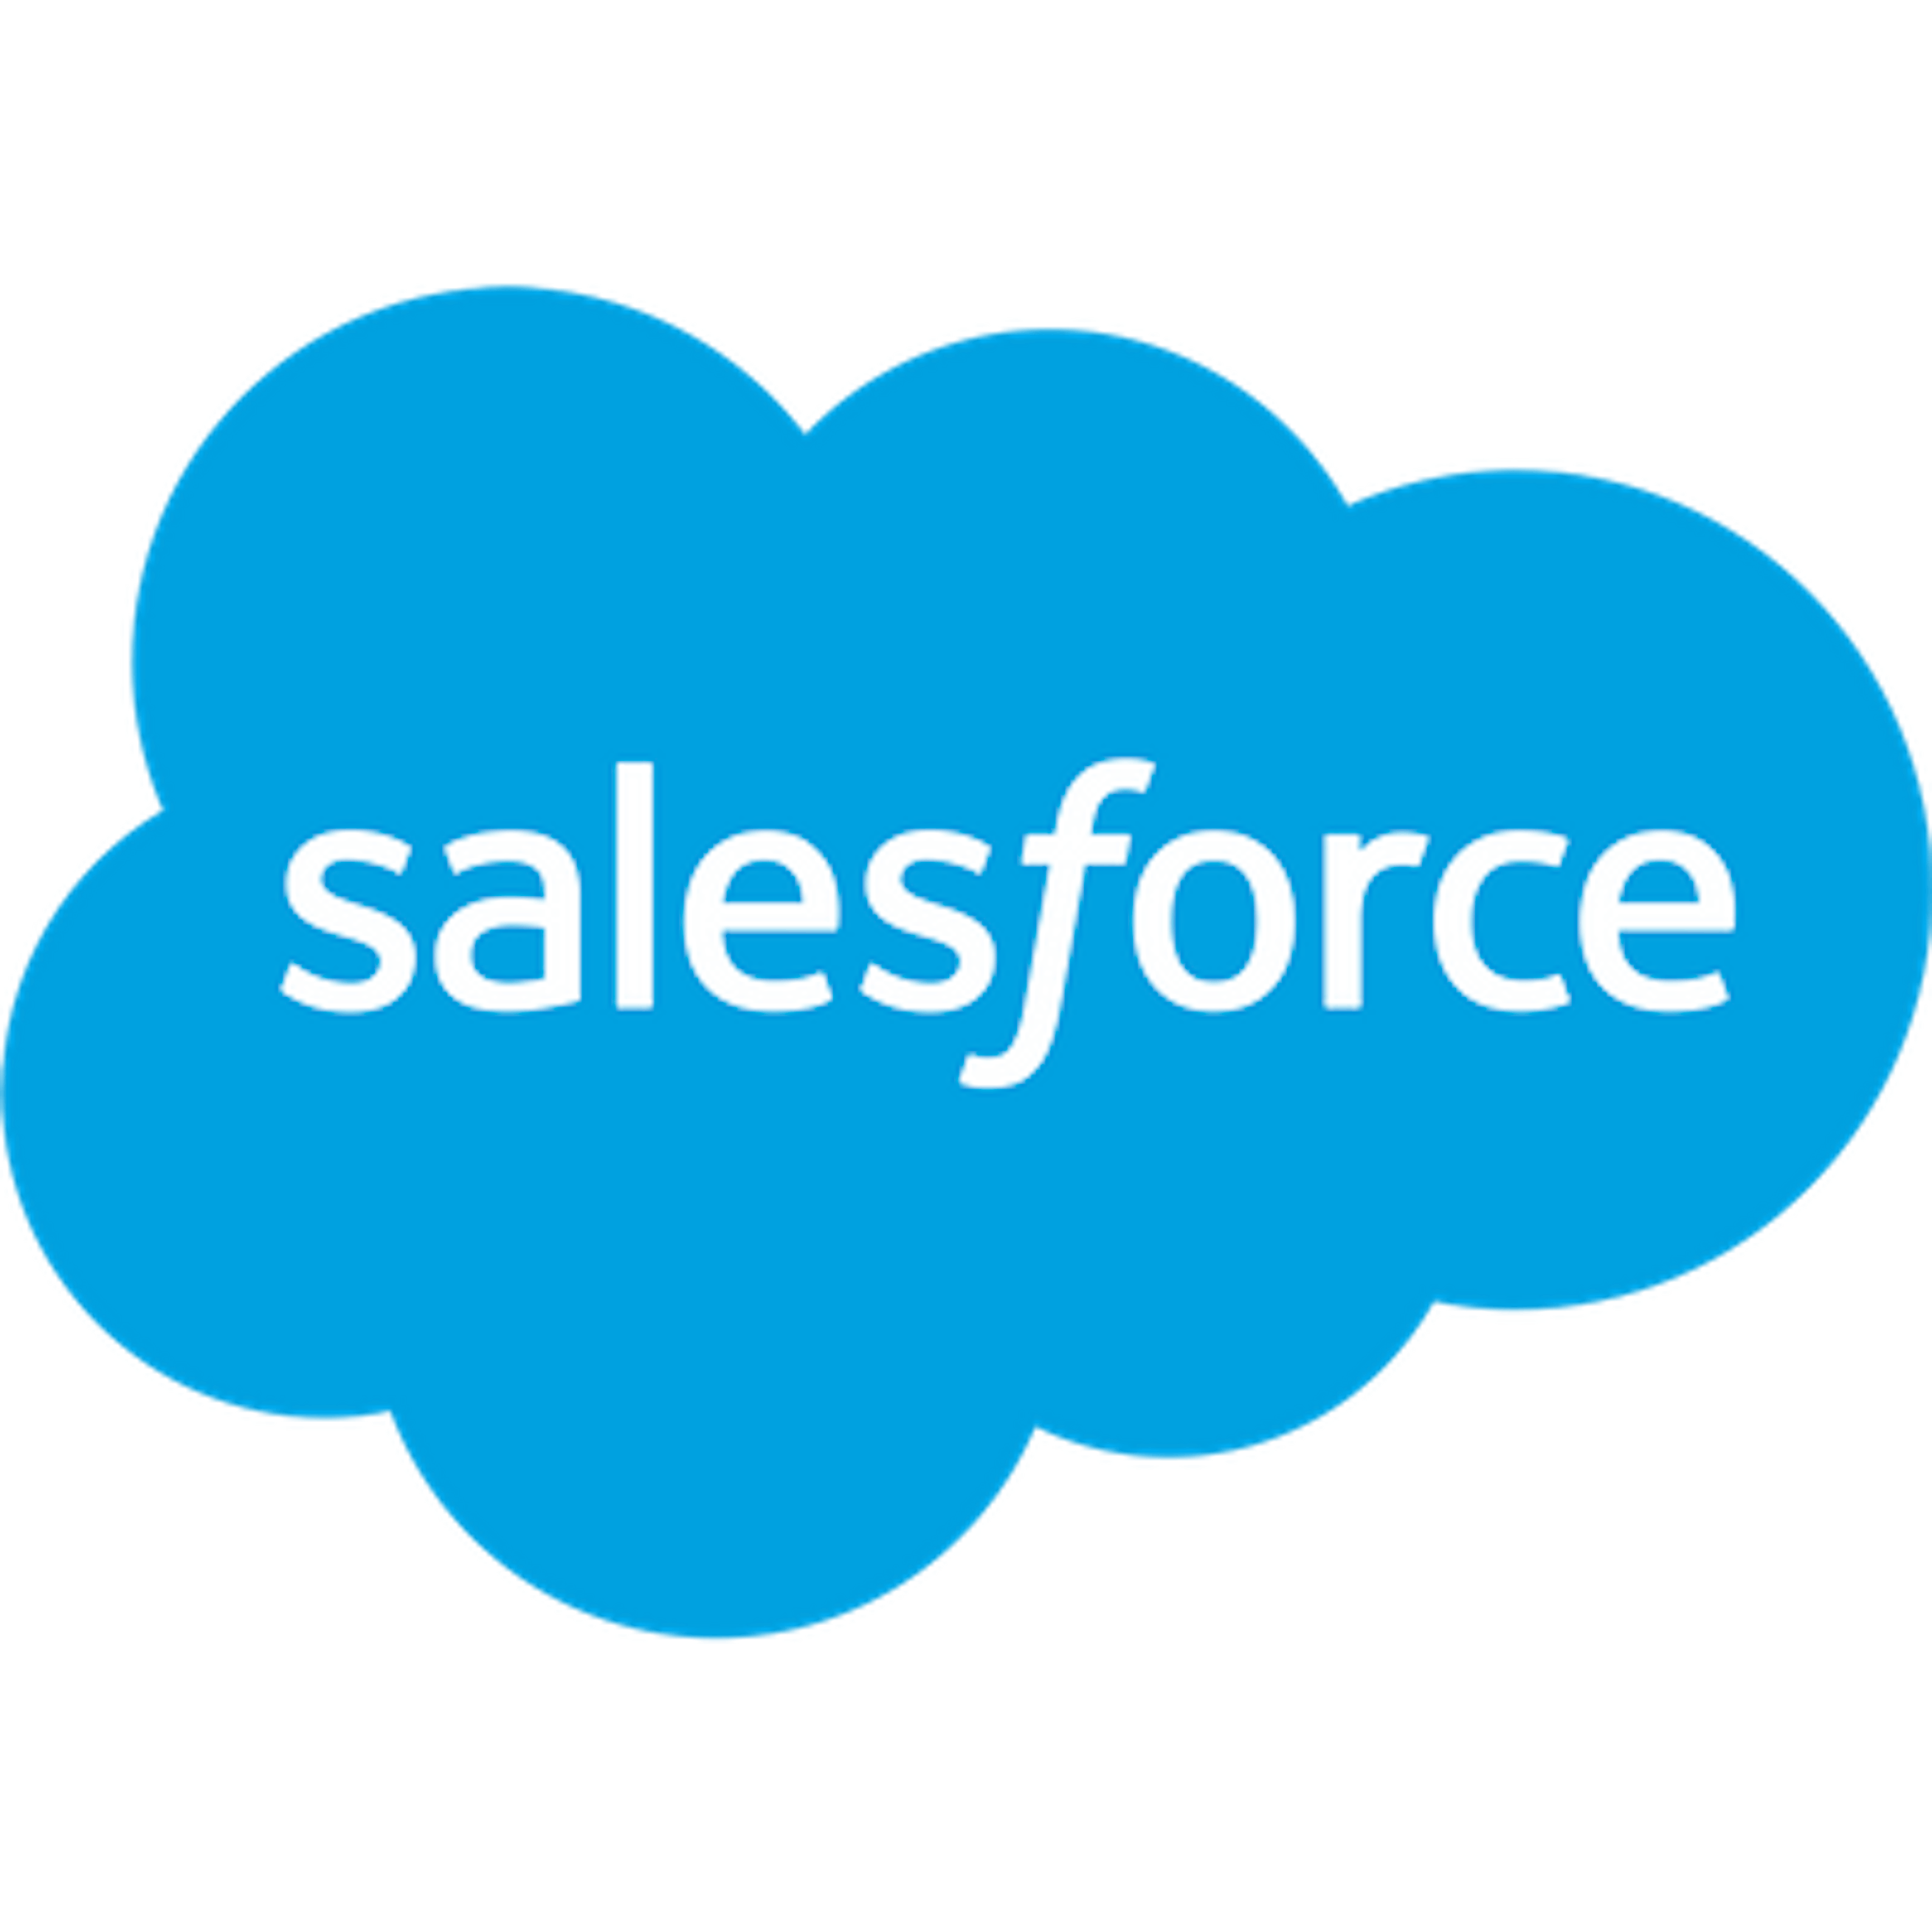 Salesforce Marketing Cloud Pricing, Features, Reviews & Alternatives